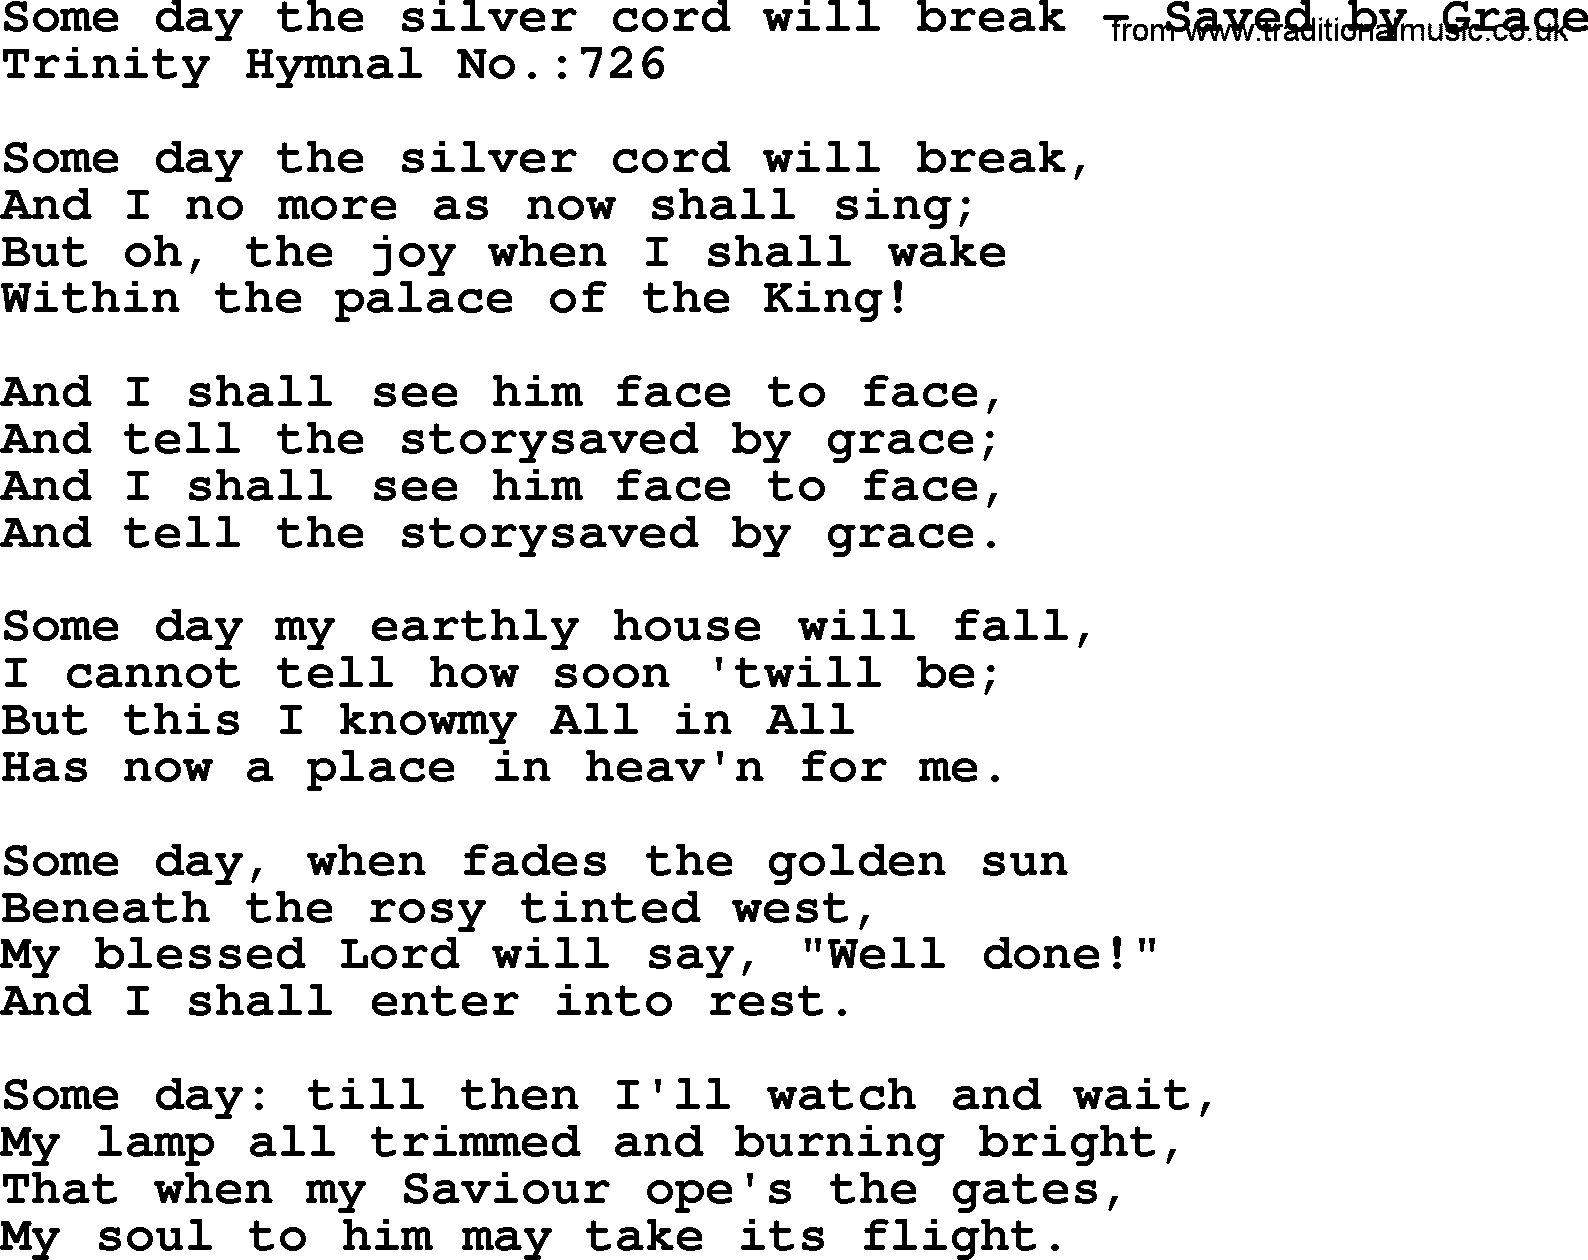 Trinity Hymnal Hymn: Some Day The Silver Cord Will Break--Saved By Grace, lyrics with midi music